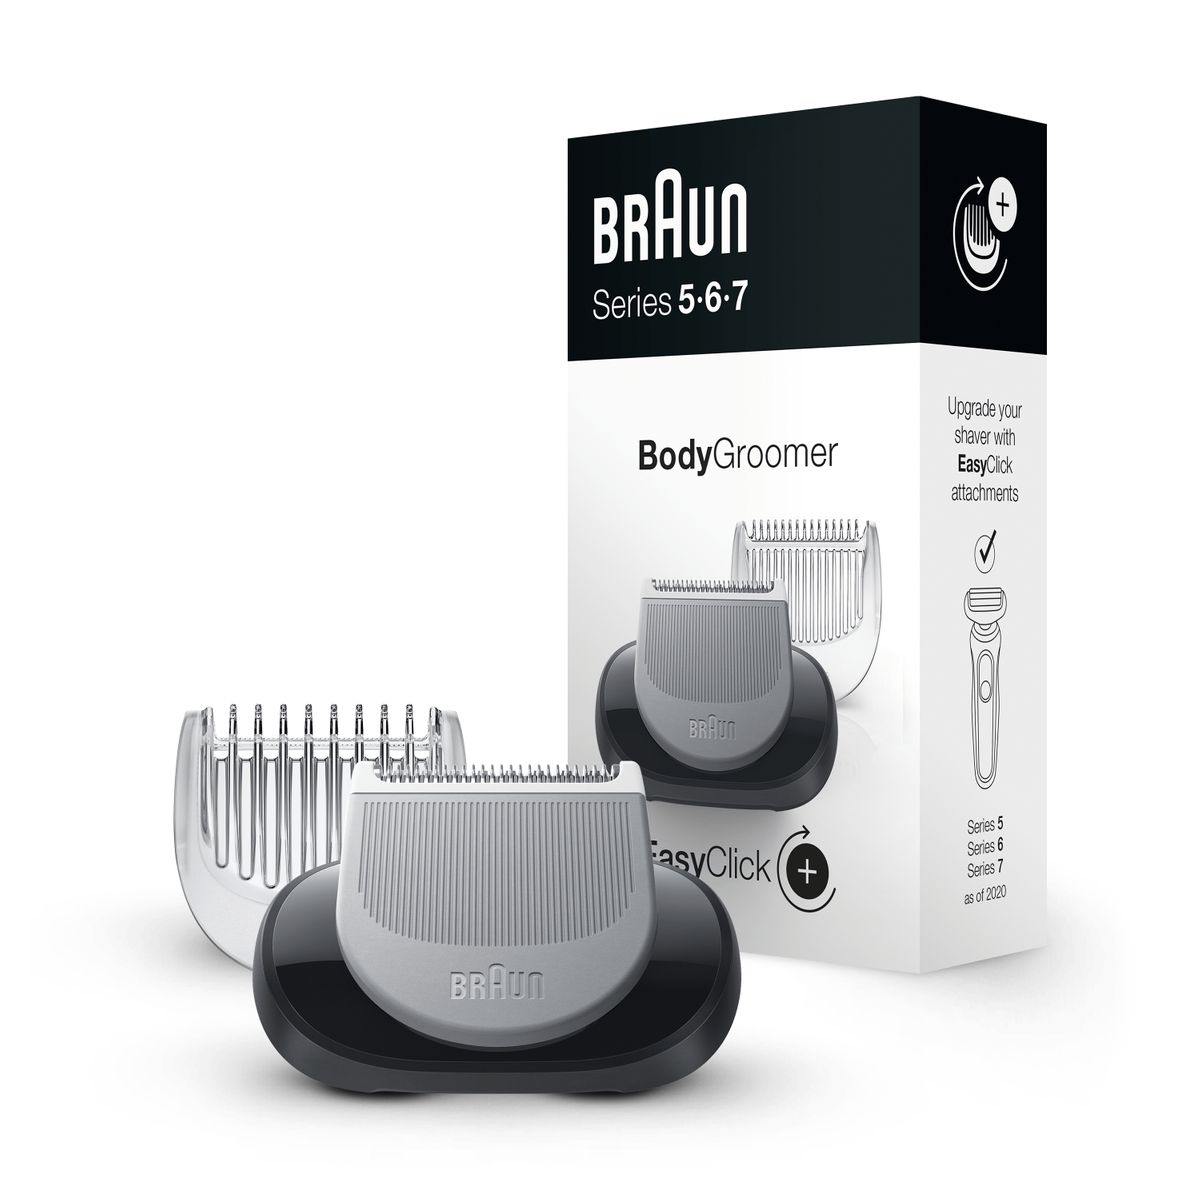 Braun EasyClick Bodygroomer attachment for shaver men, compatible with Series 5, 6 and 7 electric shavers (shaver models from 2020) Bodygroomer Single